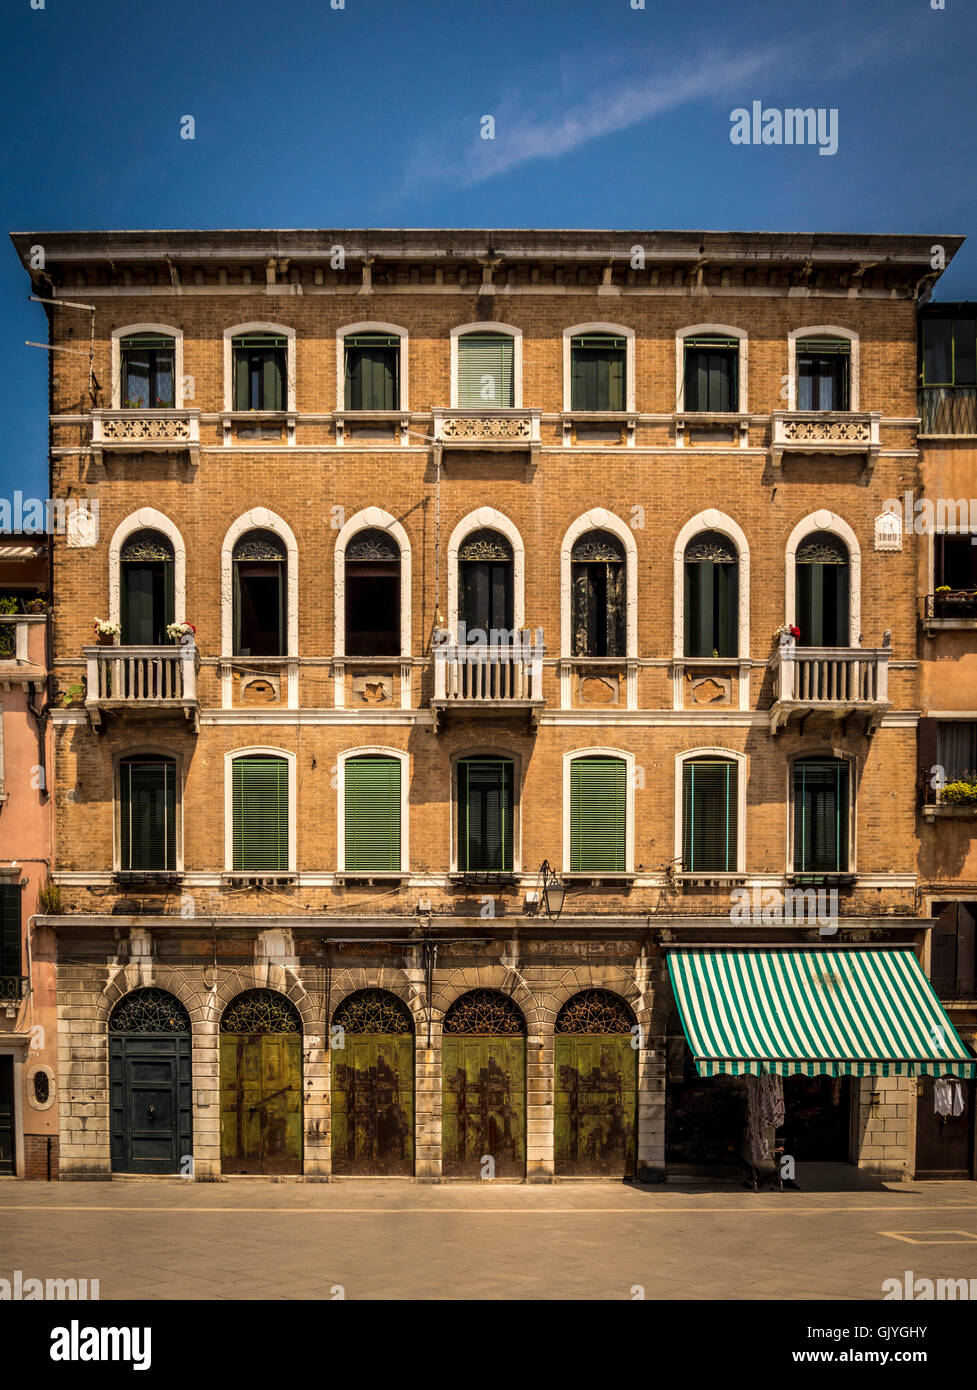 Traditional brick building with venetian blinds at the arched windows. Stock Photo